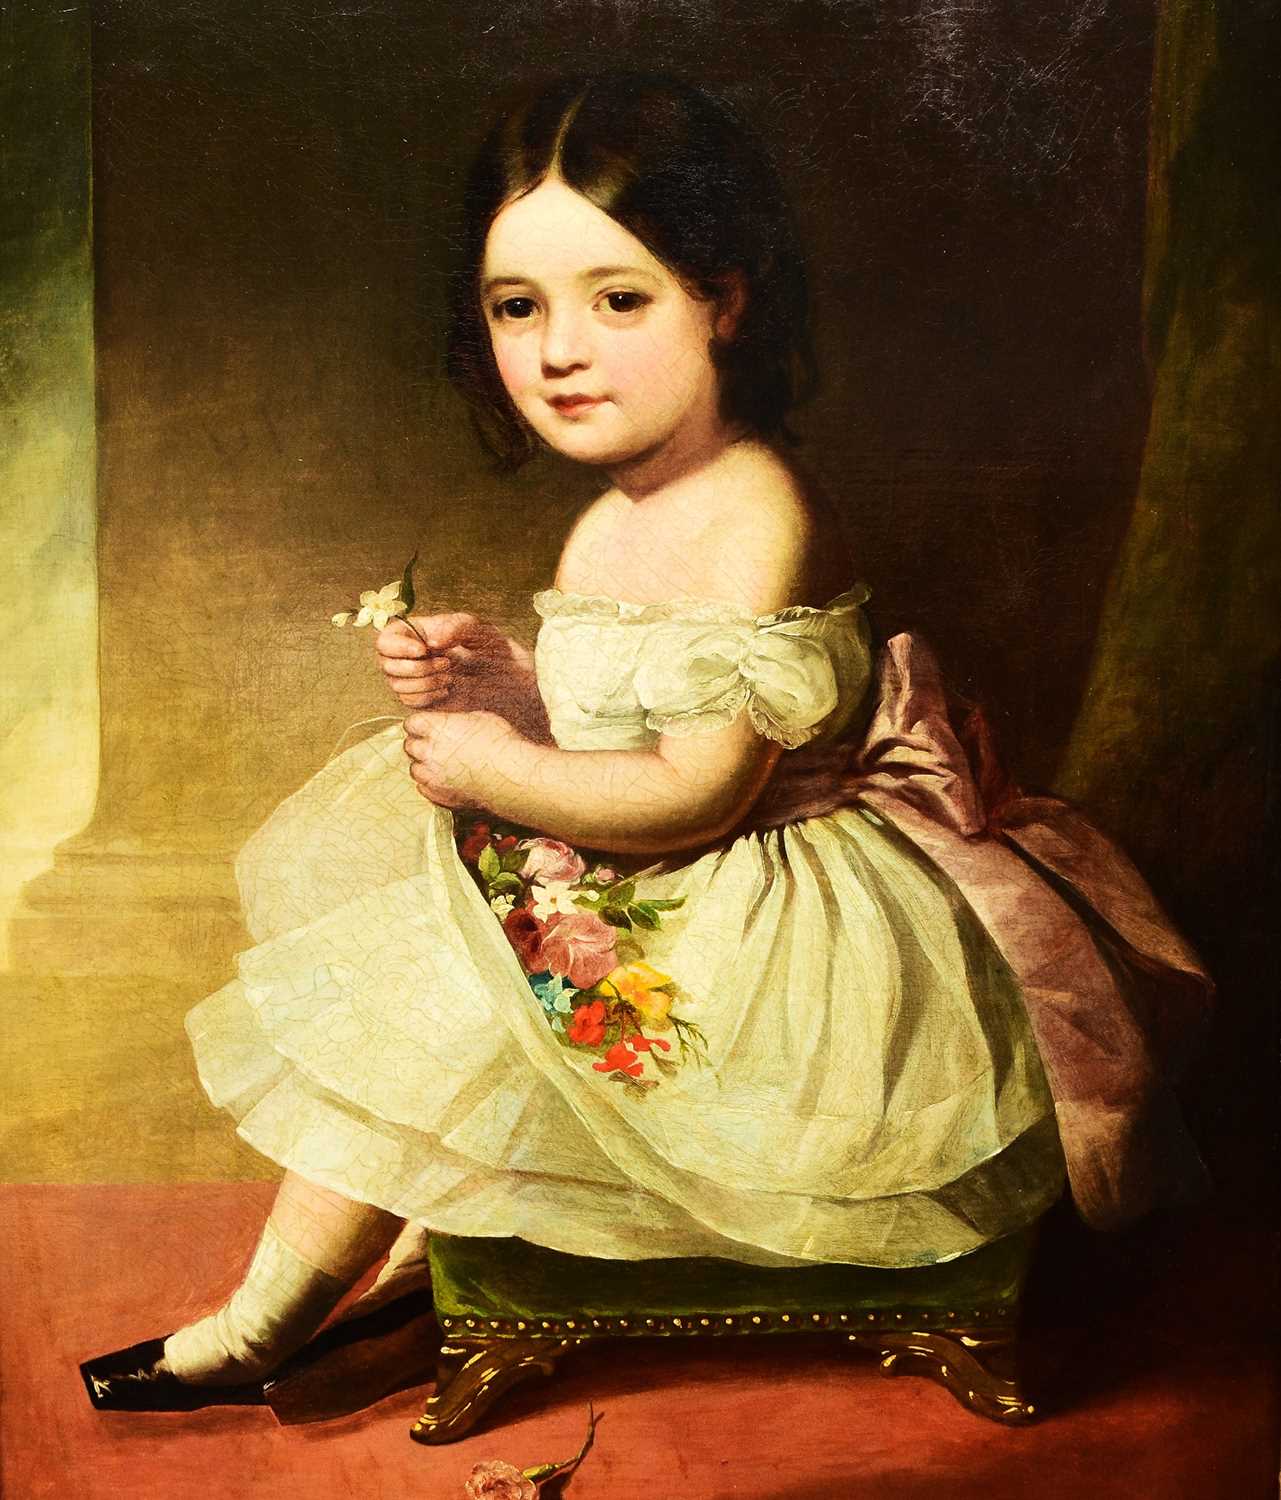 English School (c.1830) Portrait of a Young Girl Holding Flowers - Image 3 of 5